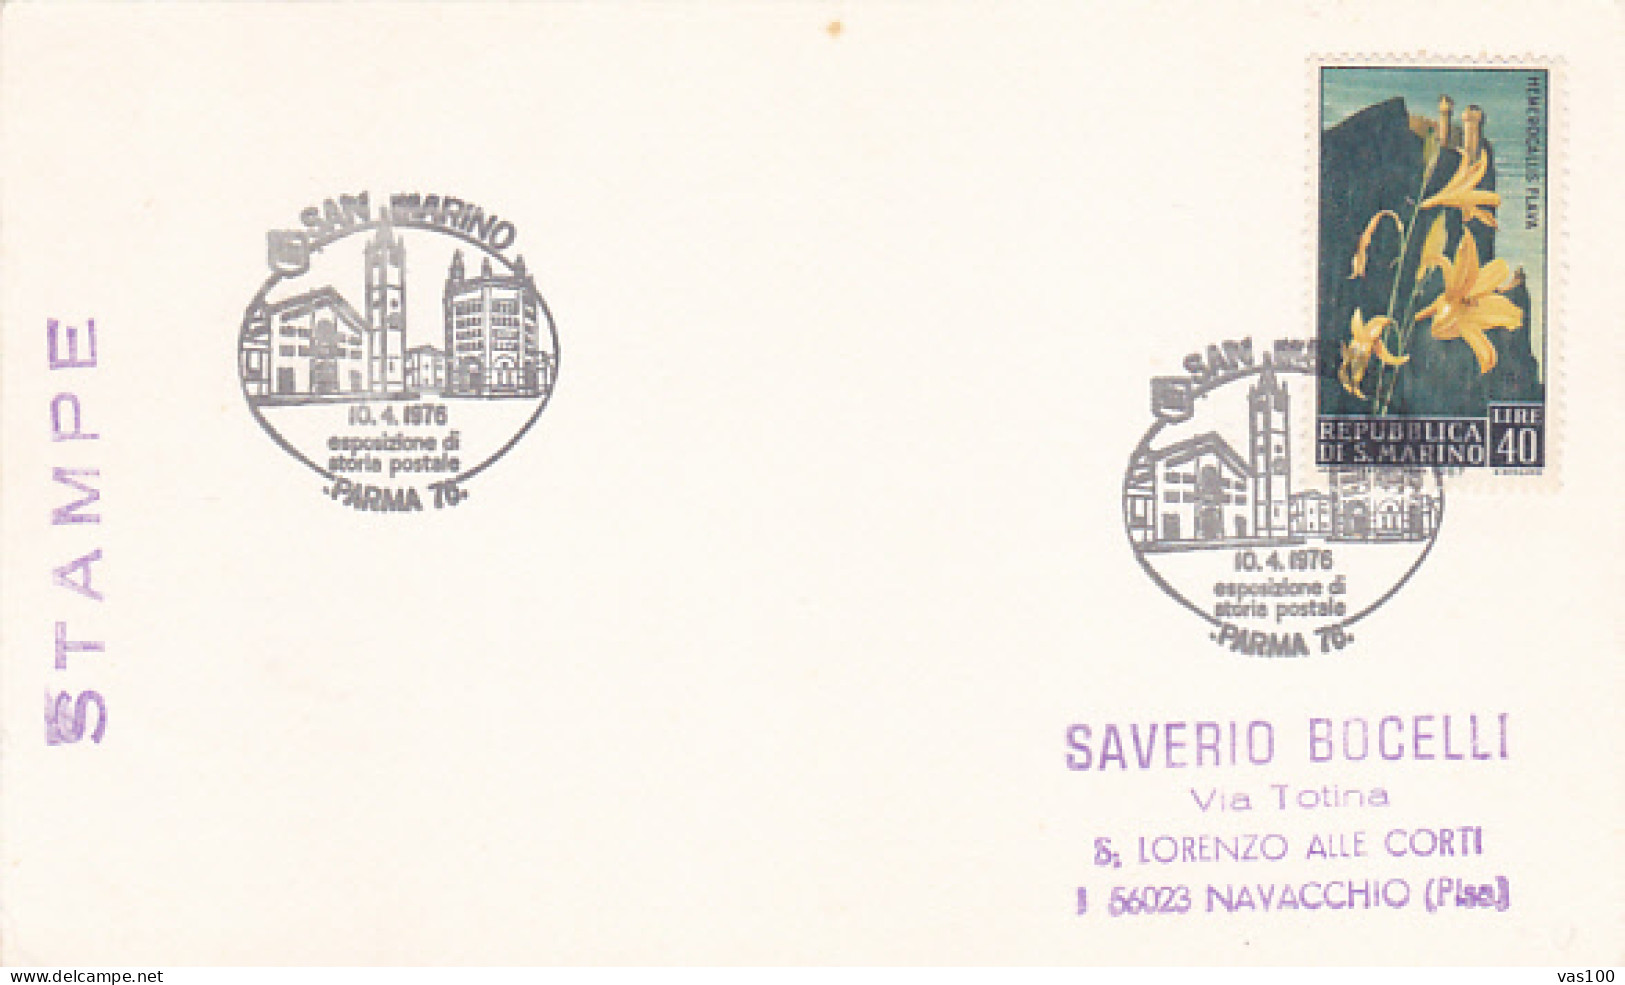 PARMA'76 POSTAL HISTORY EXHIBITION SPECIAL POSTMARKS, LILIES FLOWERS STAMP ON CARDBOARD, 1976, SAN MARINO - Storia Postale